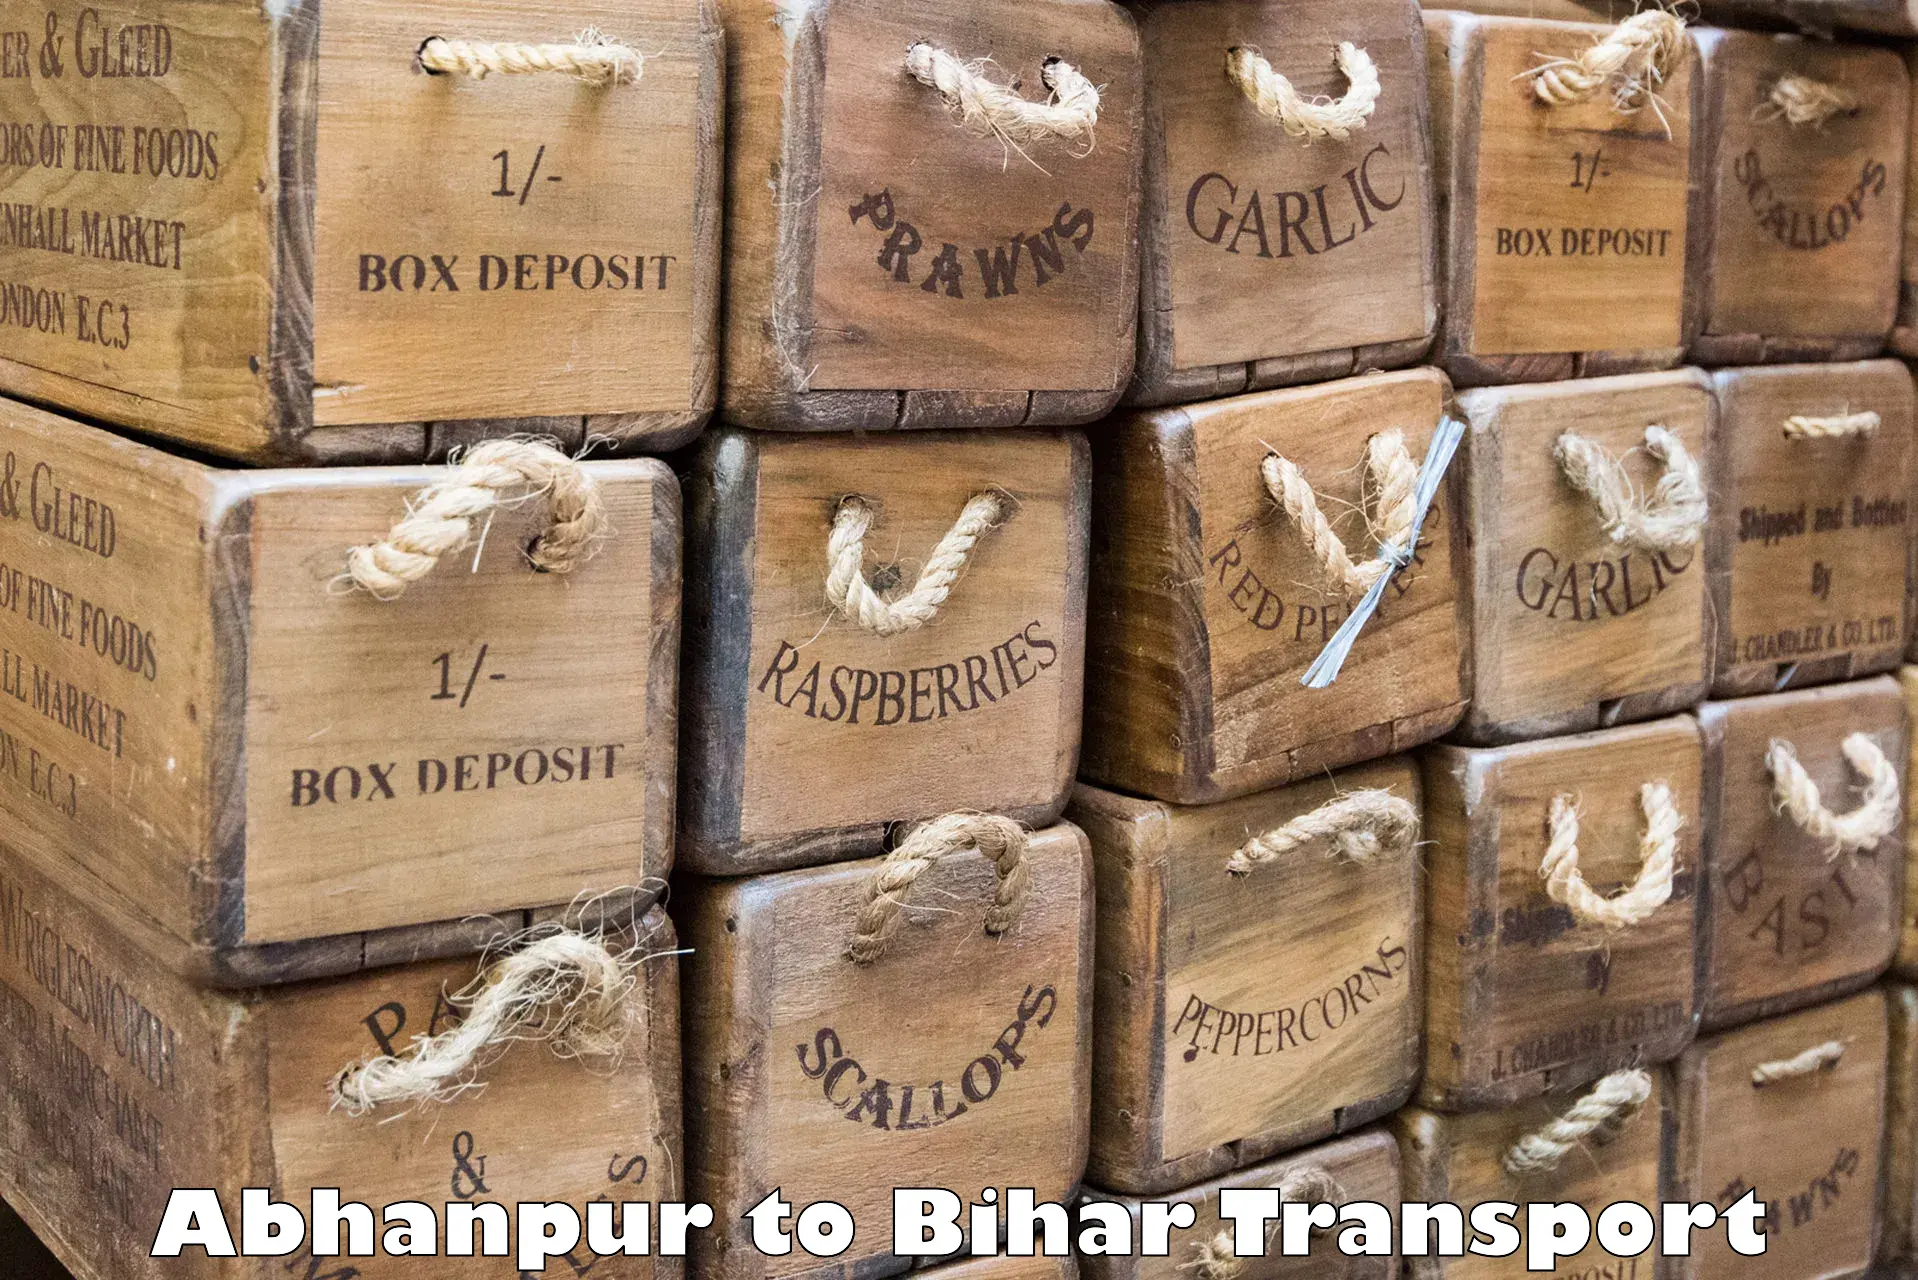 Lorry transport service Abhanpur to Sandesh